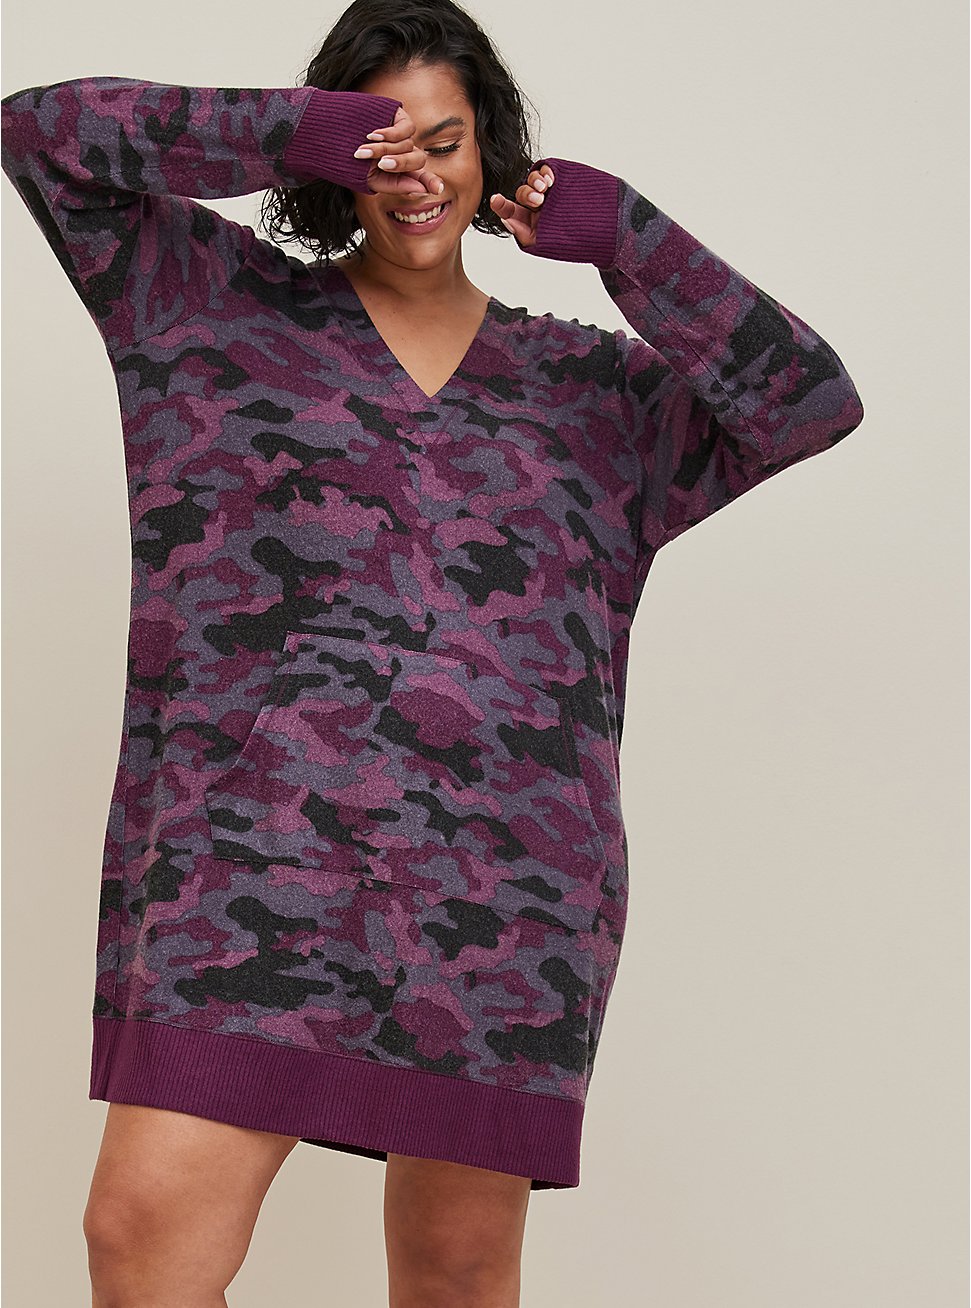 Super Soft Plush Hooded Lounge Tunic Gown, POTENT PURPLE, hi-res